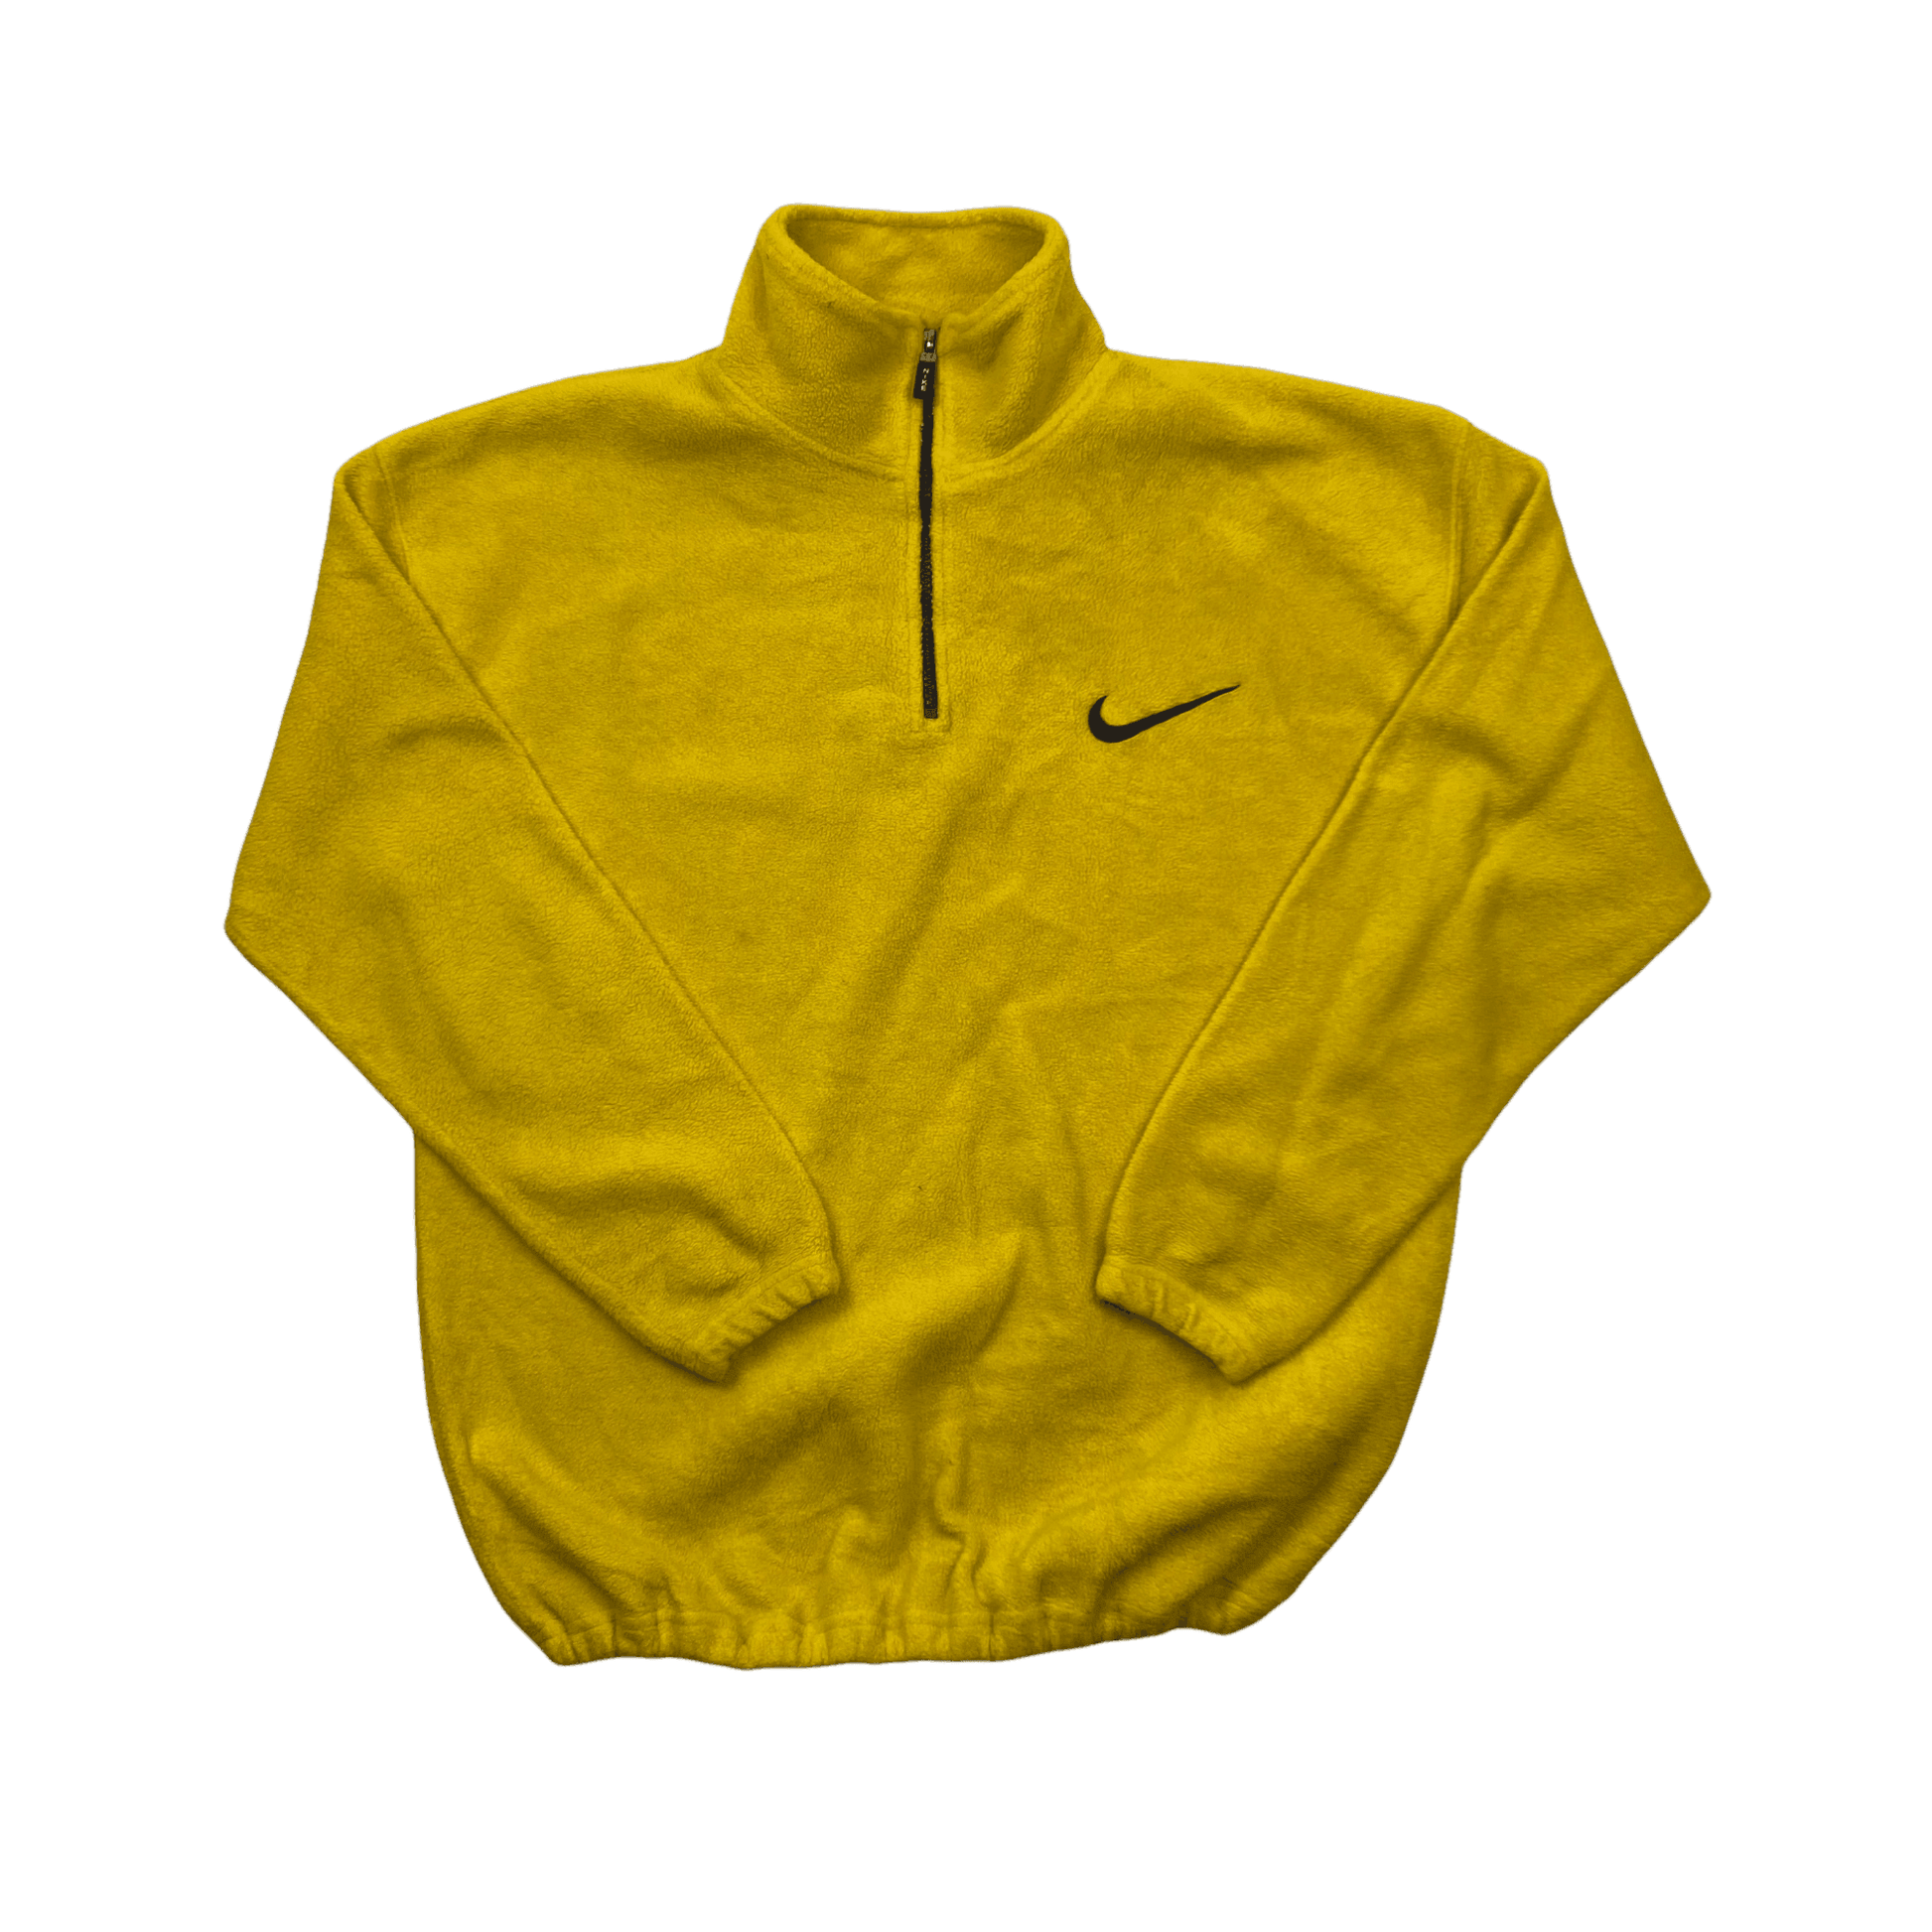 Vintage 90s Yellow Nike Quarter Zip Fleece - Recommended Size - Extra Large - The Streetwear Studio